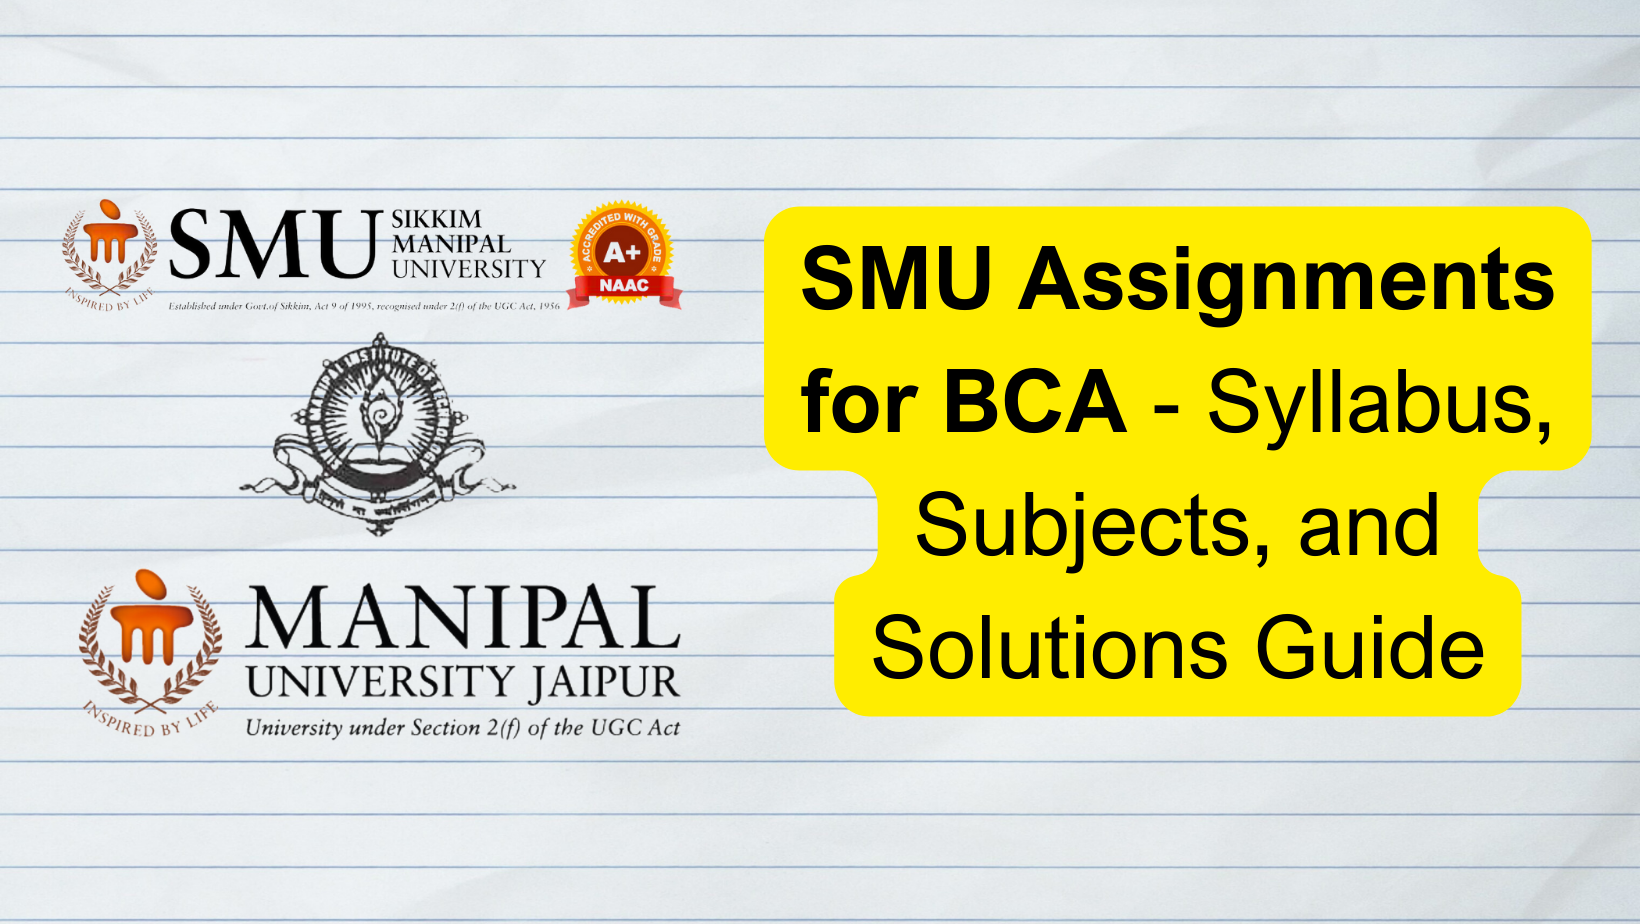 SMU Assignments for BCA - Syllabus, Subjects, and Solutions Guide